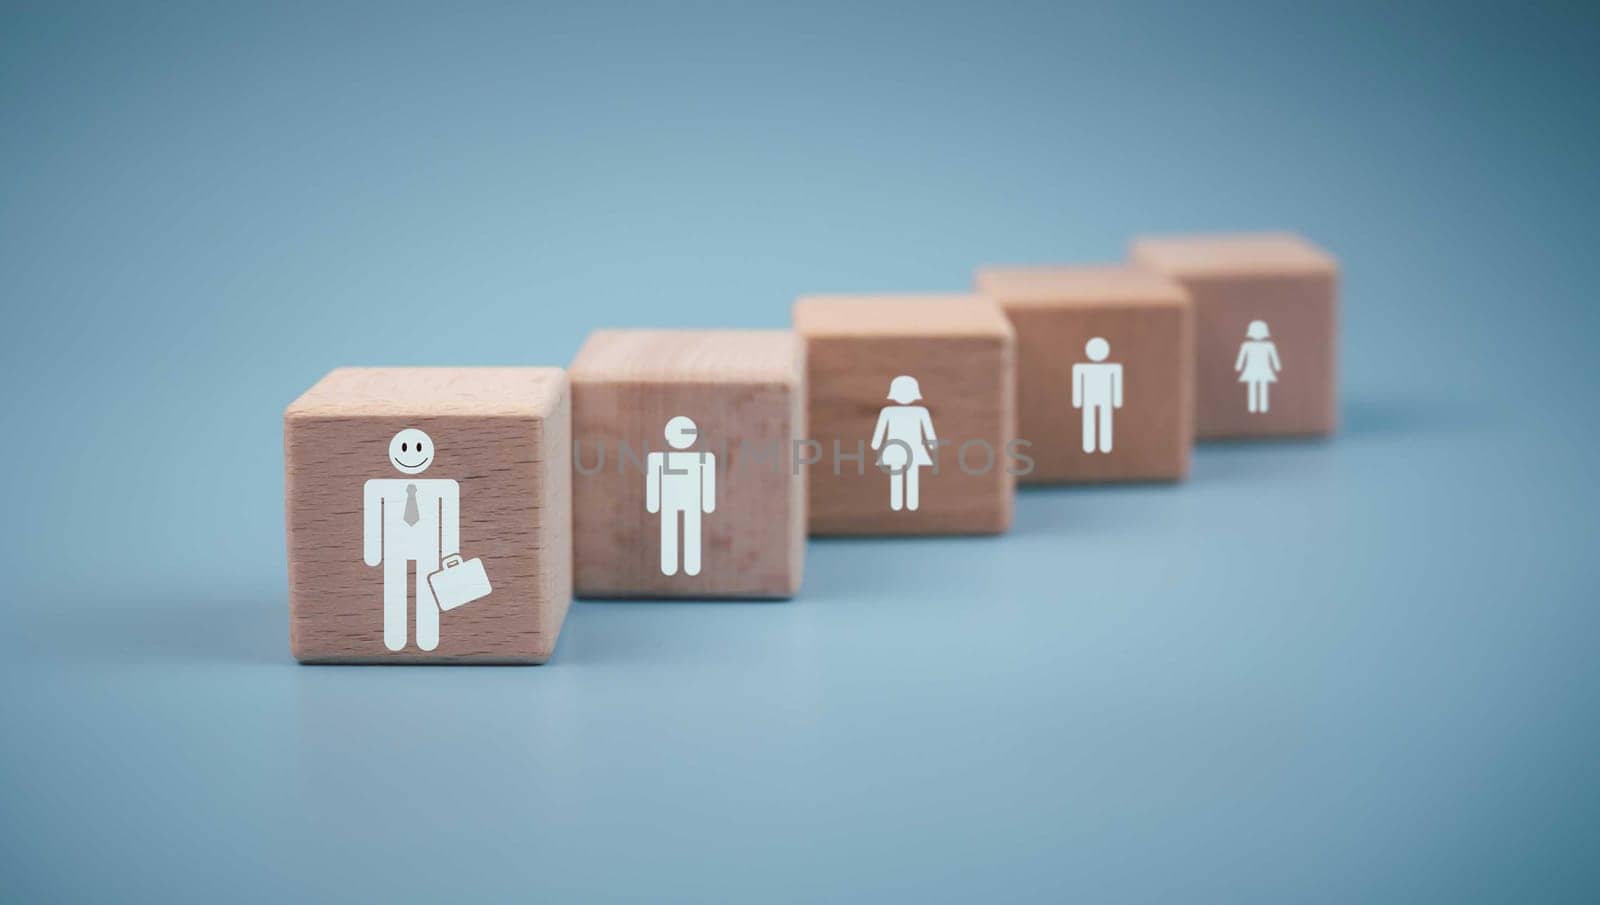 Concept Business and HR for leadership and team leader, one wooden dolls different and stand out from the group. by Unimages2527